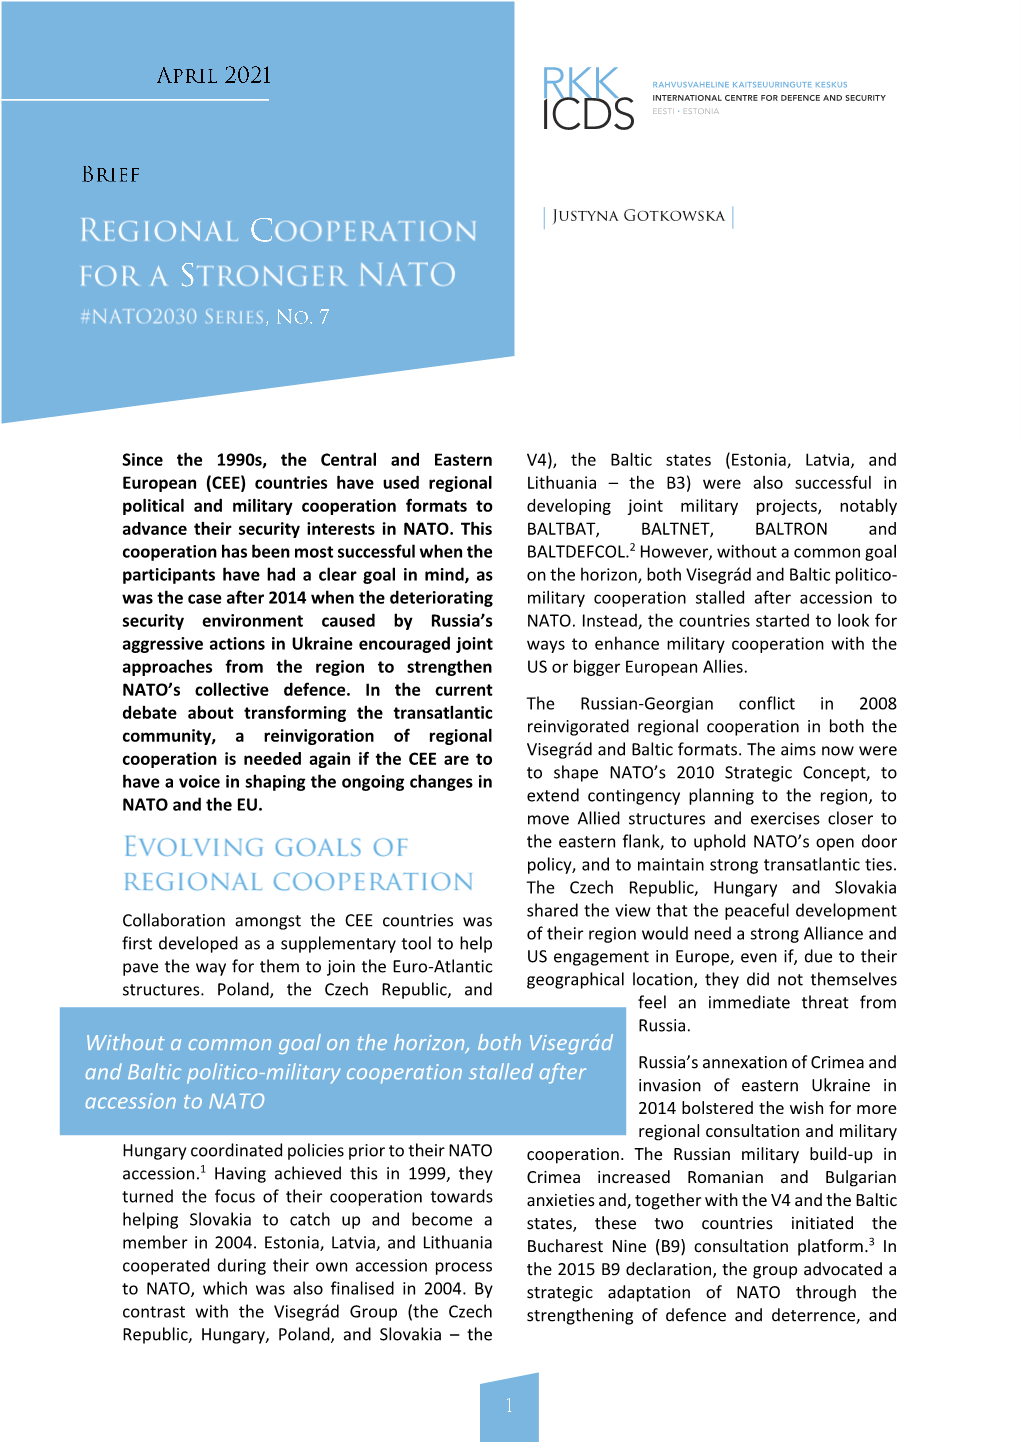 Regional Cooperation for a Stronger NATO